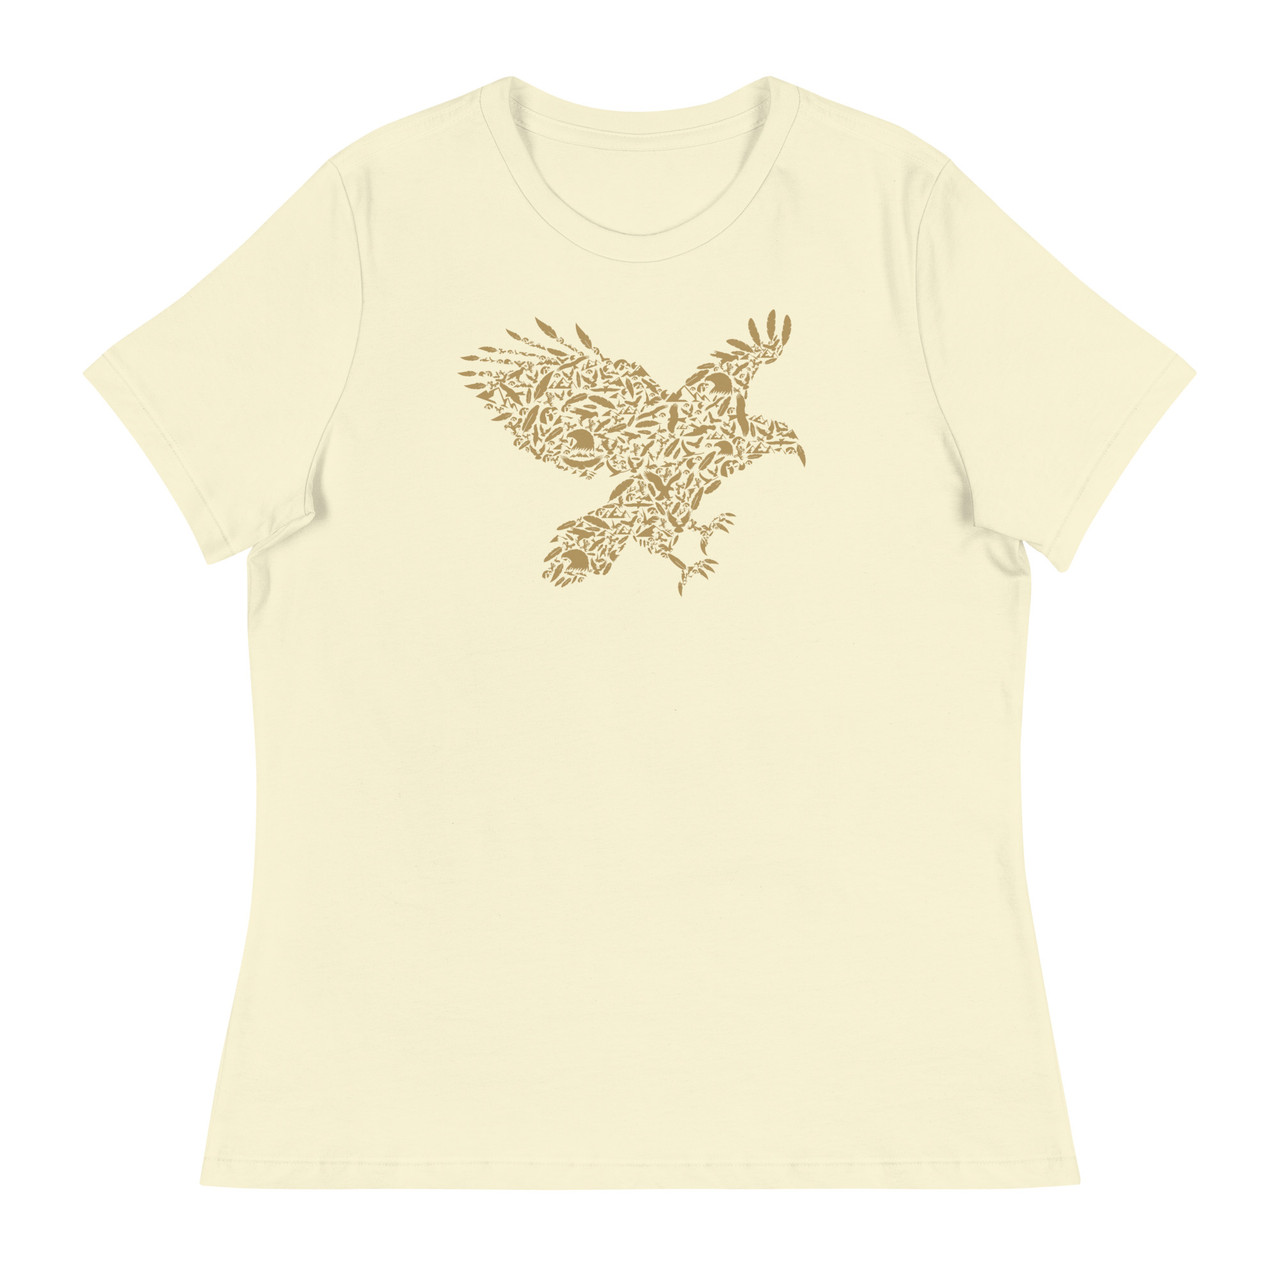 Eagle Feather Women's Relaxed T-Shirt - Bella + Canvas 6400 